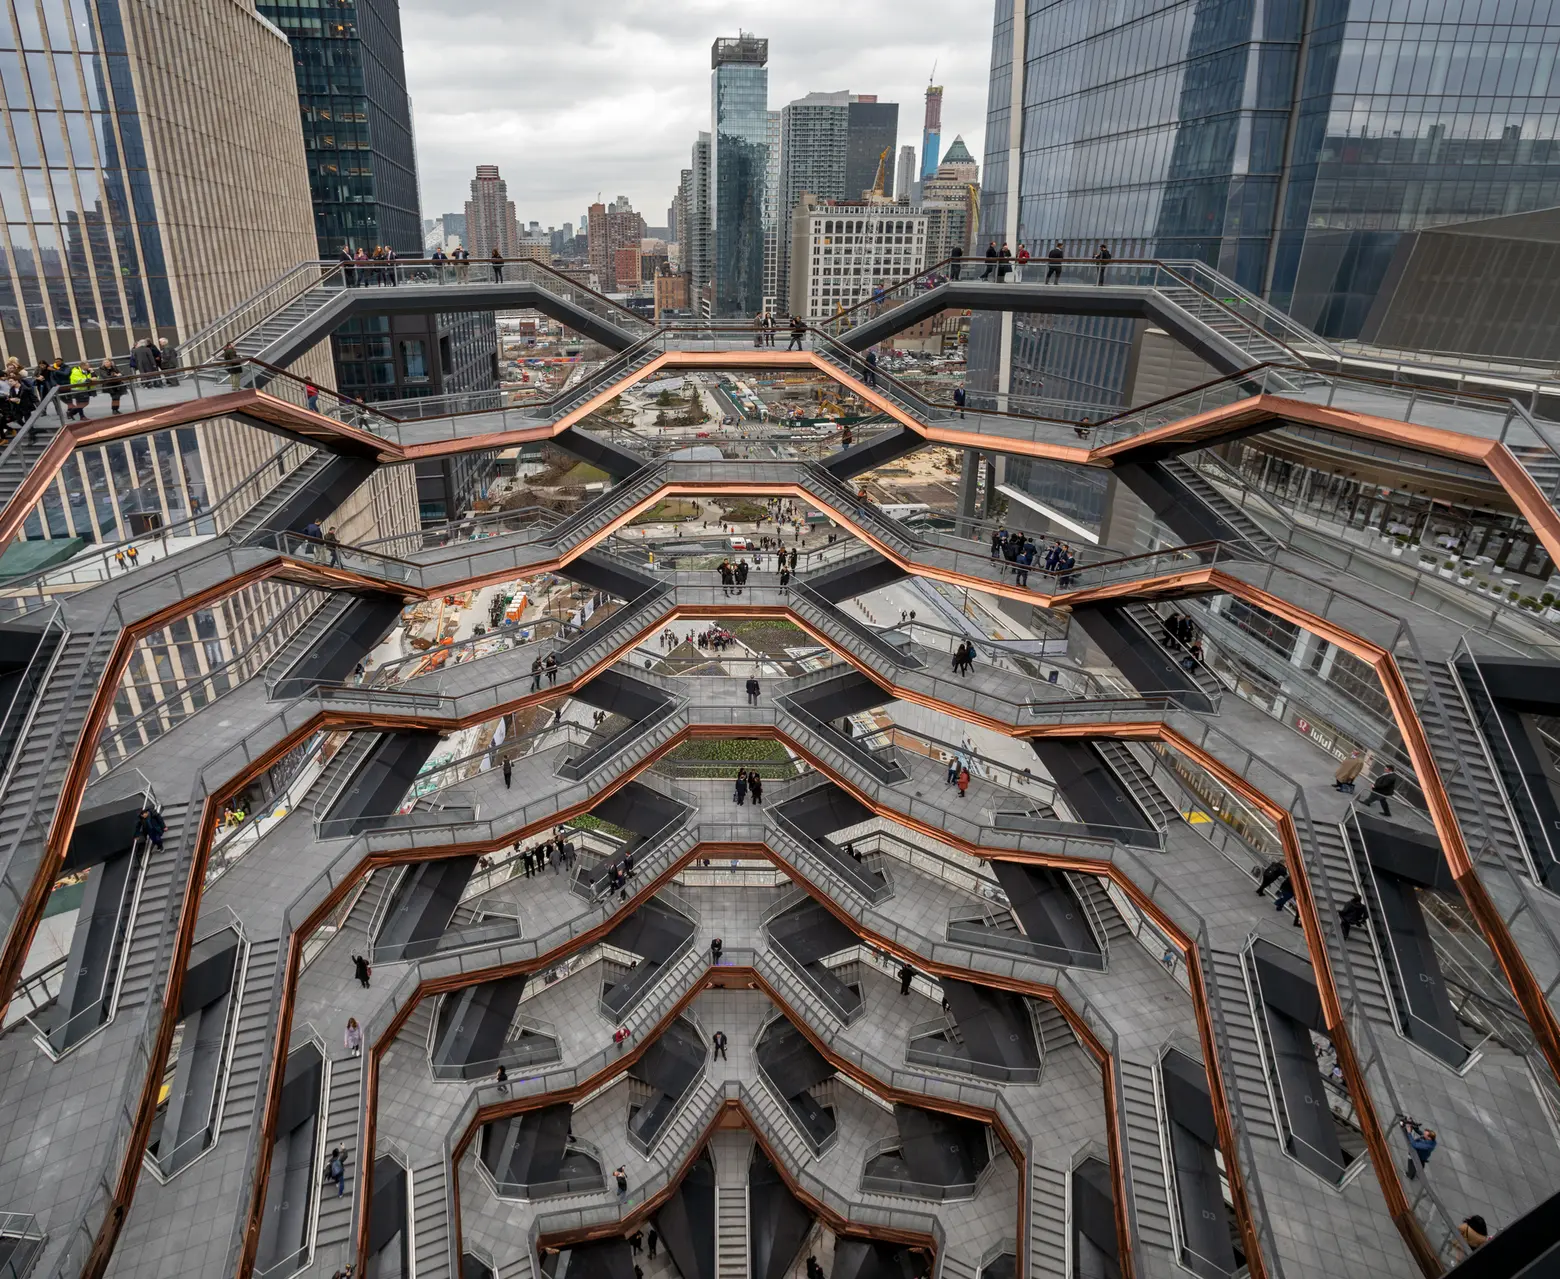 Hudson Yards’ Vessel may close permanently after fourth suicide in two years